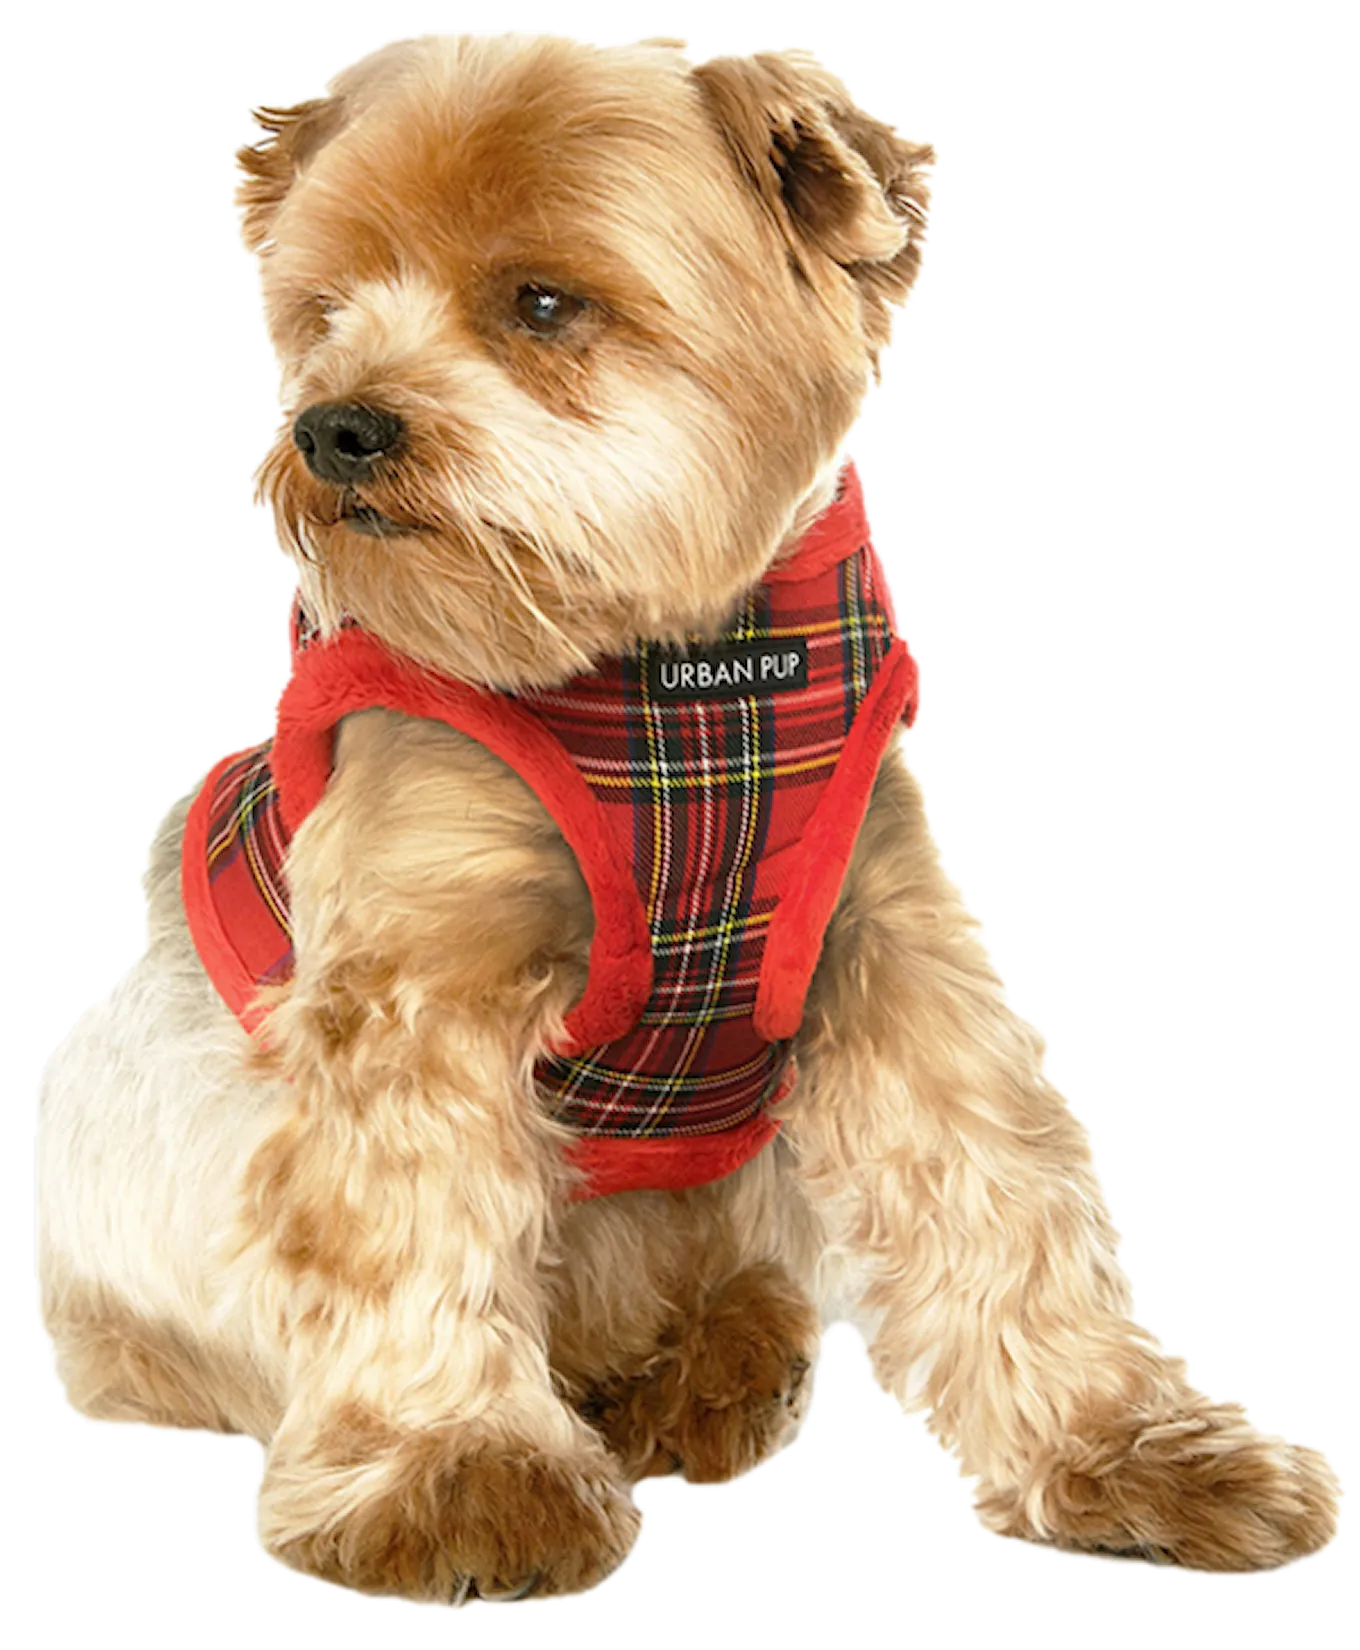 Urban pup faux fur red harness dog.png